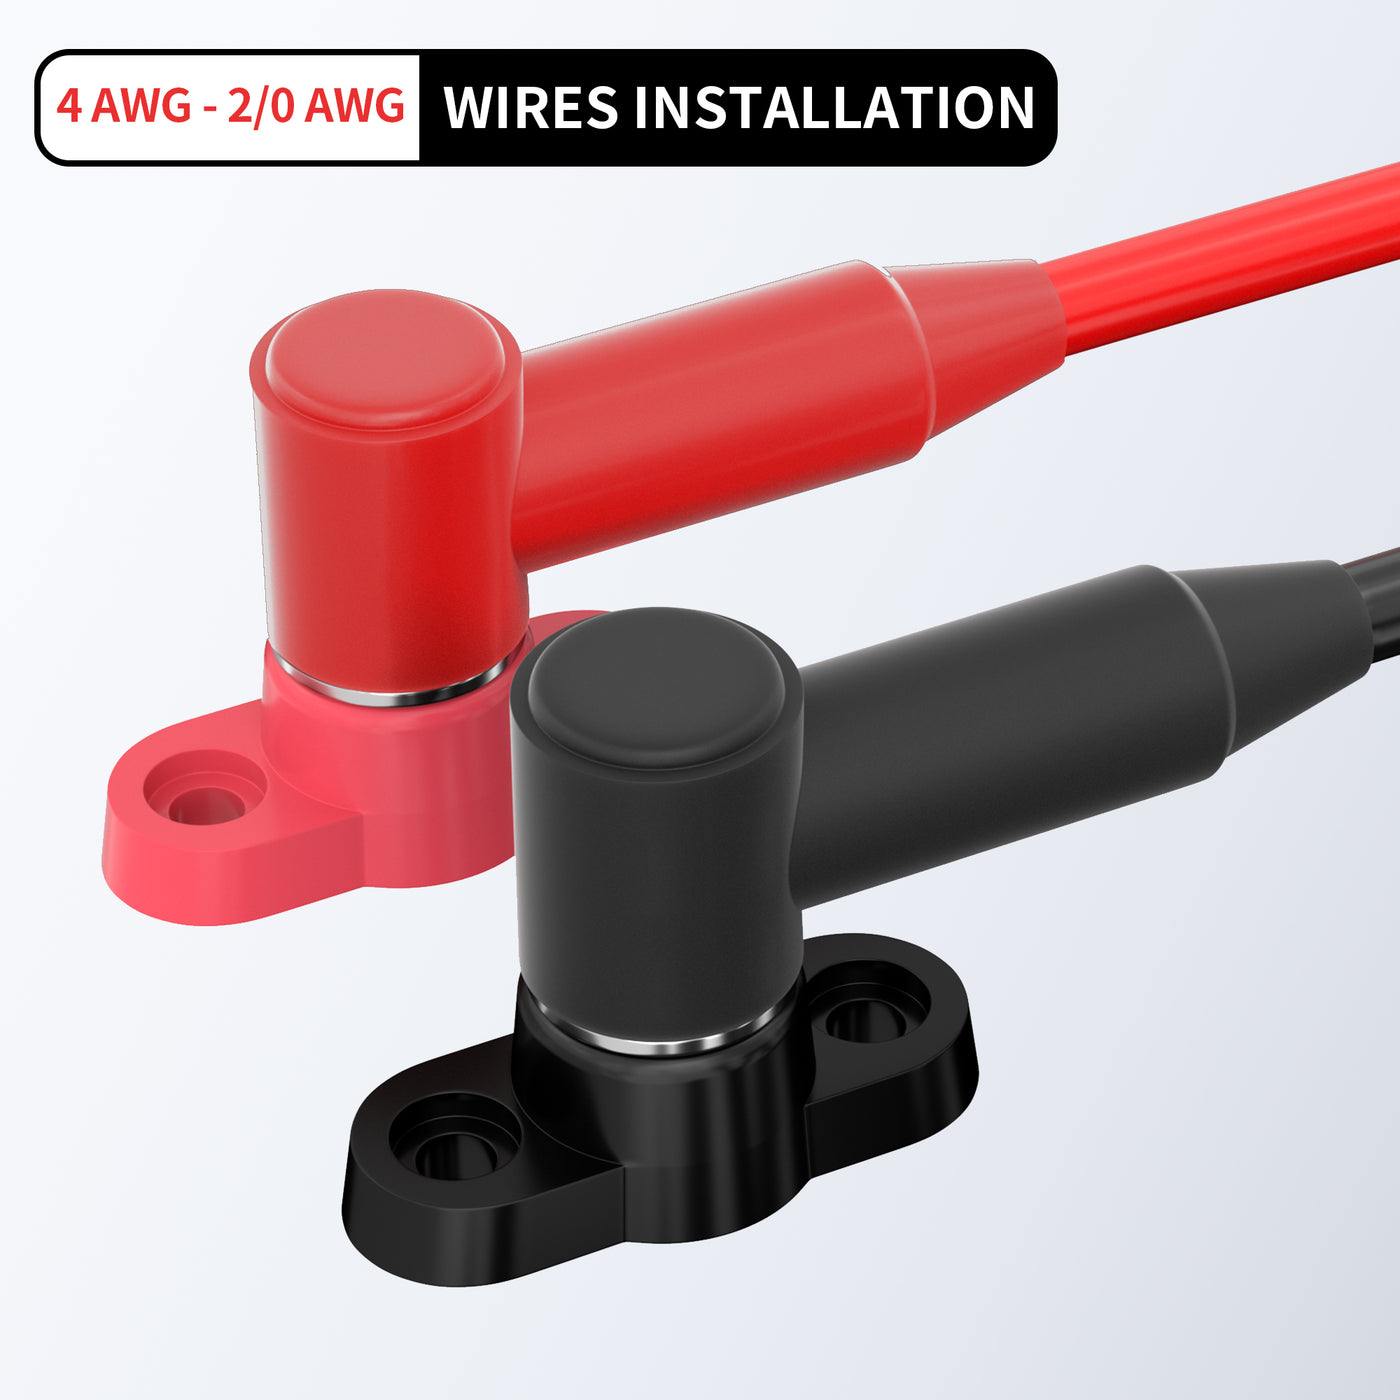 CC125-70 Silicone Insulated Stud Terminal Cover Wires Installation